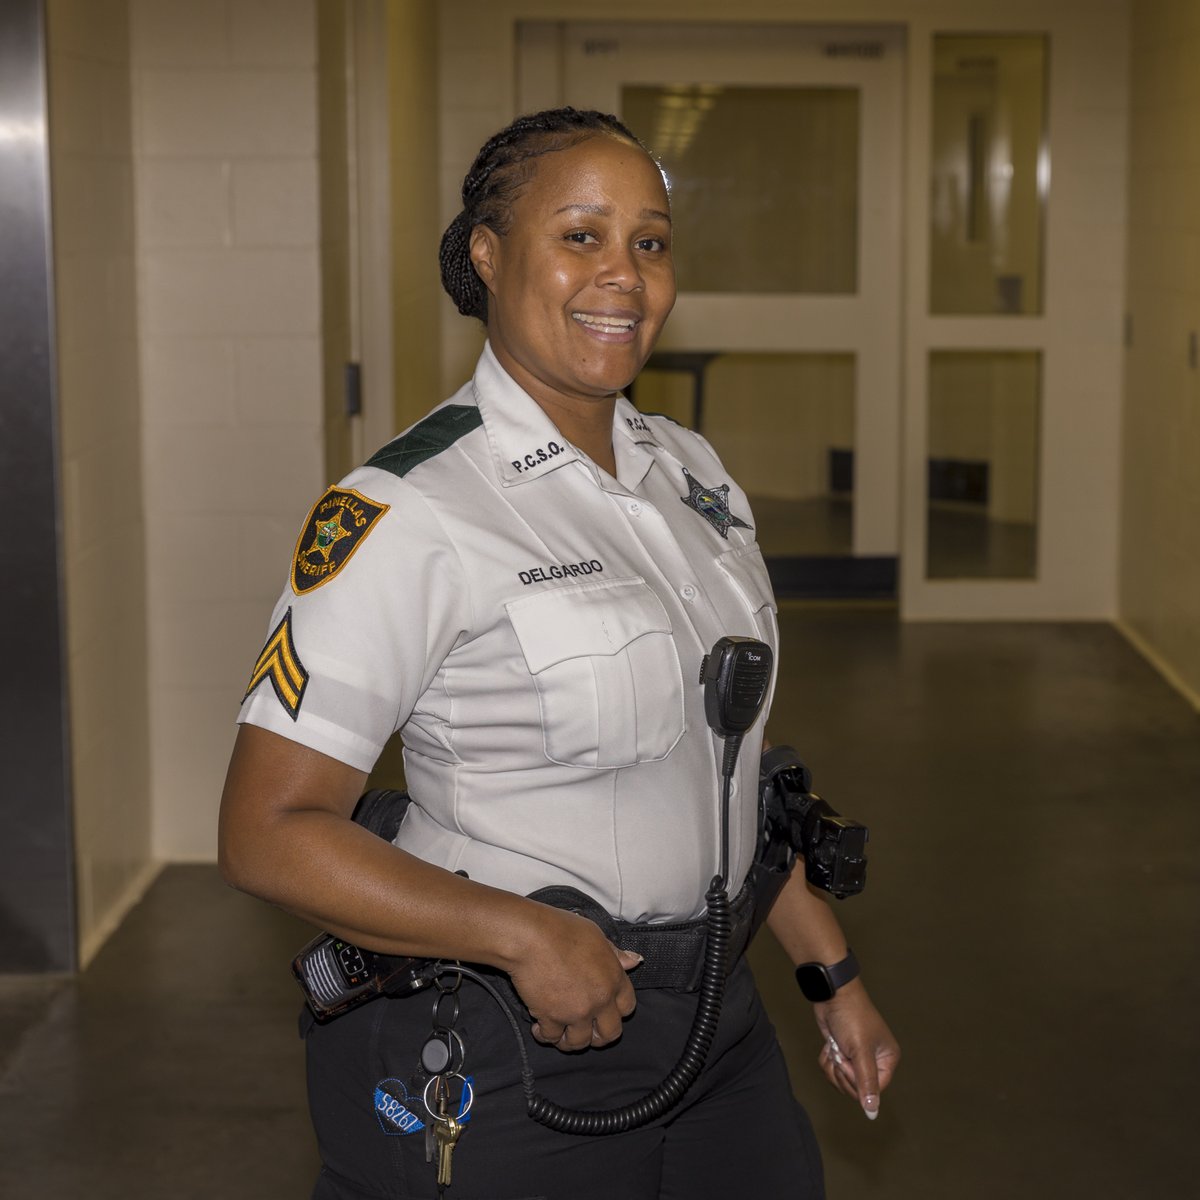 Saluting our heroes behind the scenes - the hardworking men and women who keep the Pinellas County Jail functioning seamlessly. As we mark National Correctional Officers Week, join us in celebrating our devoted detention deputies for their invaluable yet often unseen service.